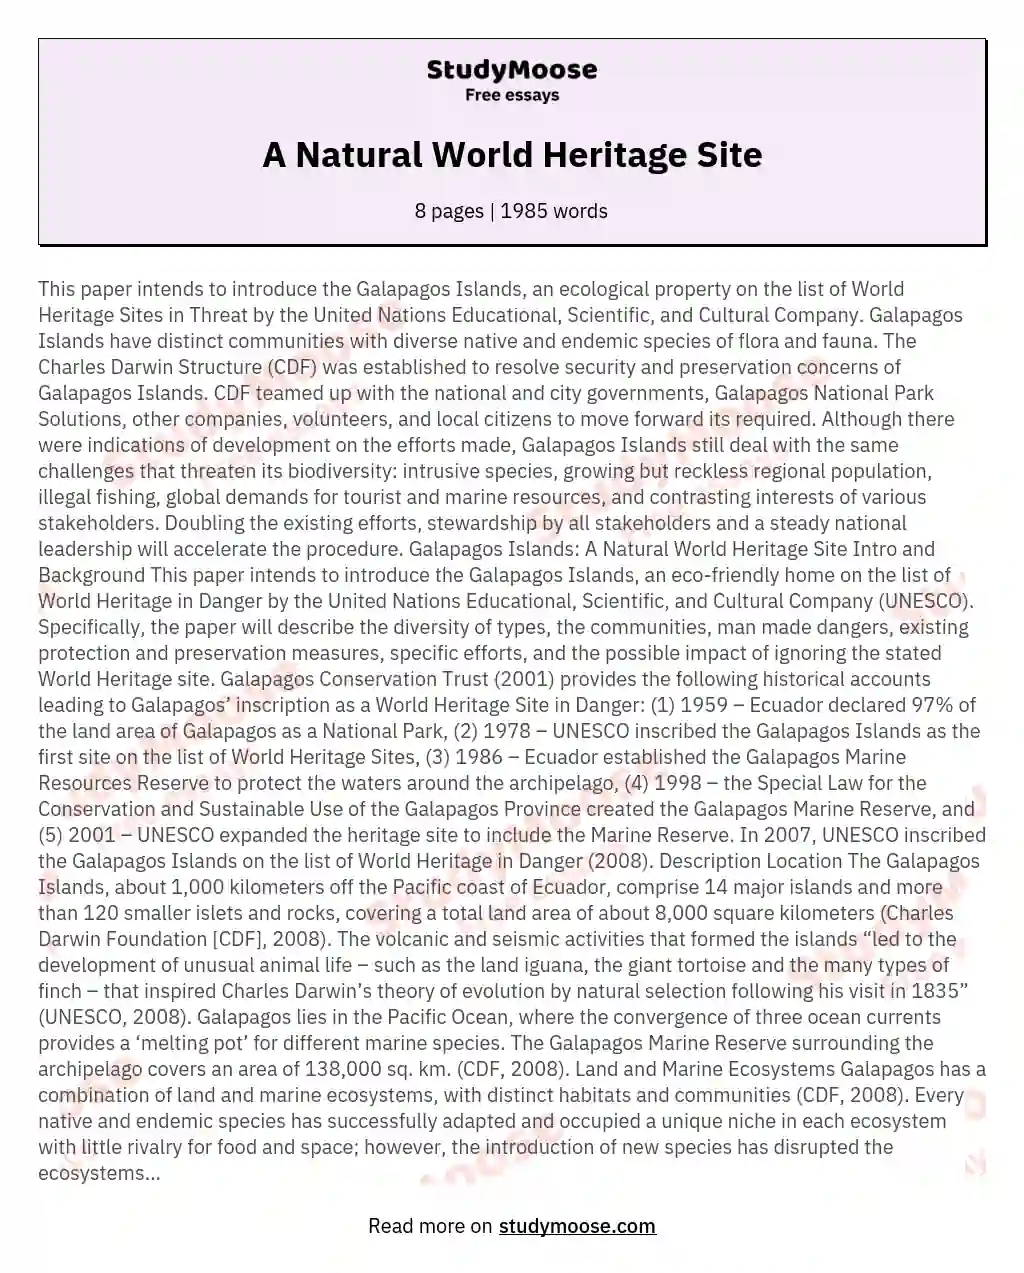 A Natural World Heritage Site essay